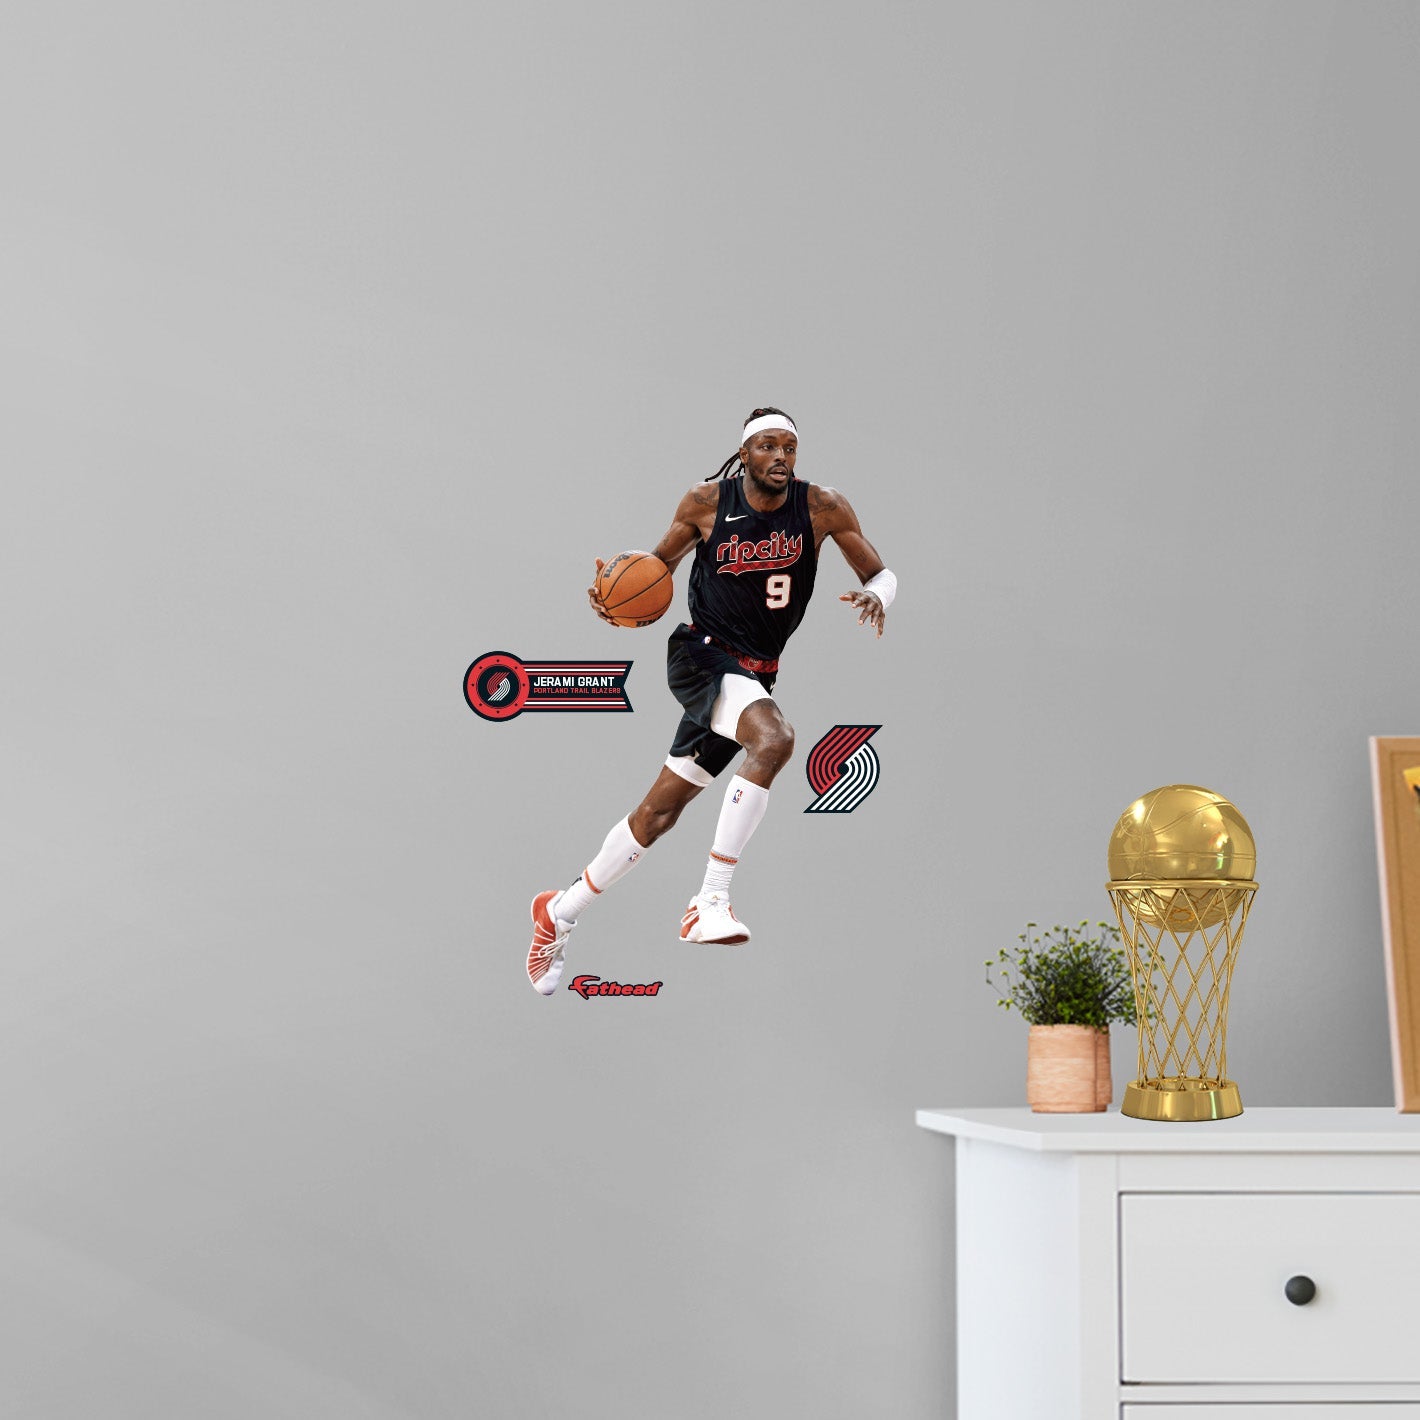 Portland Trail Blazers: Jerami Grant City Jersey        - Officially Licensed NBA Removable     Adhesive Decal